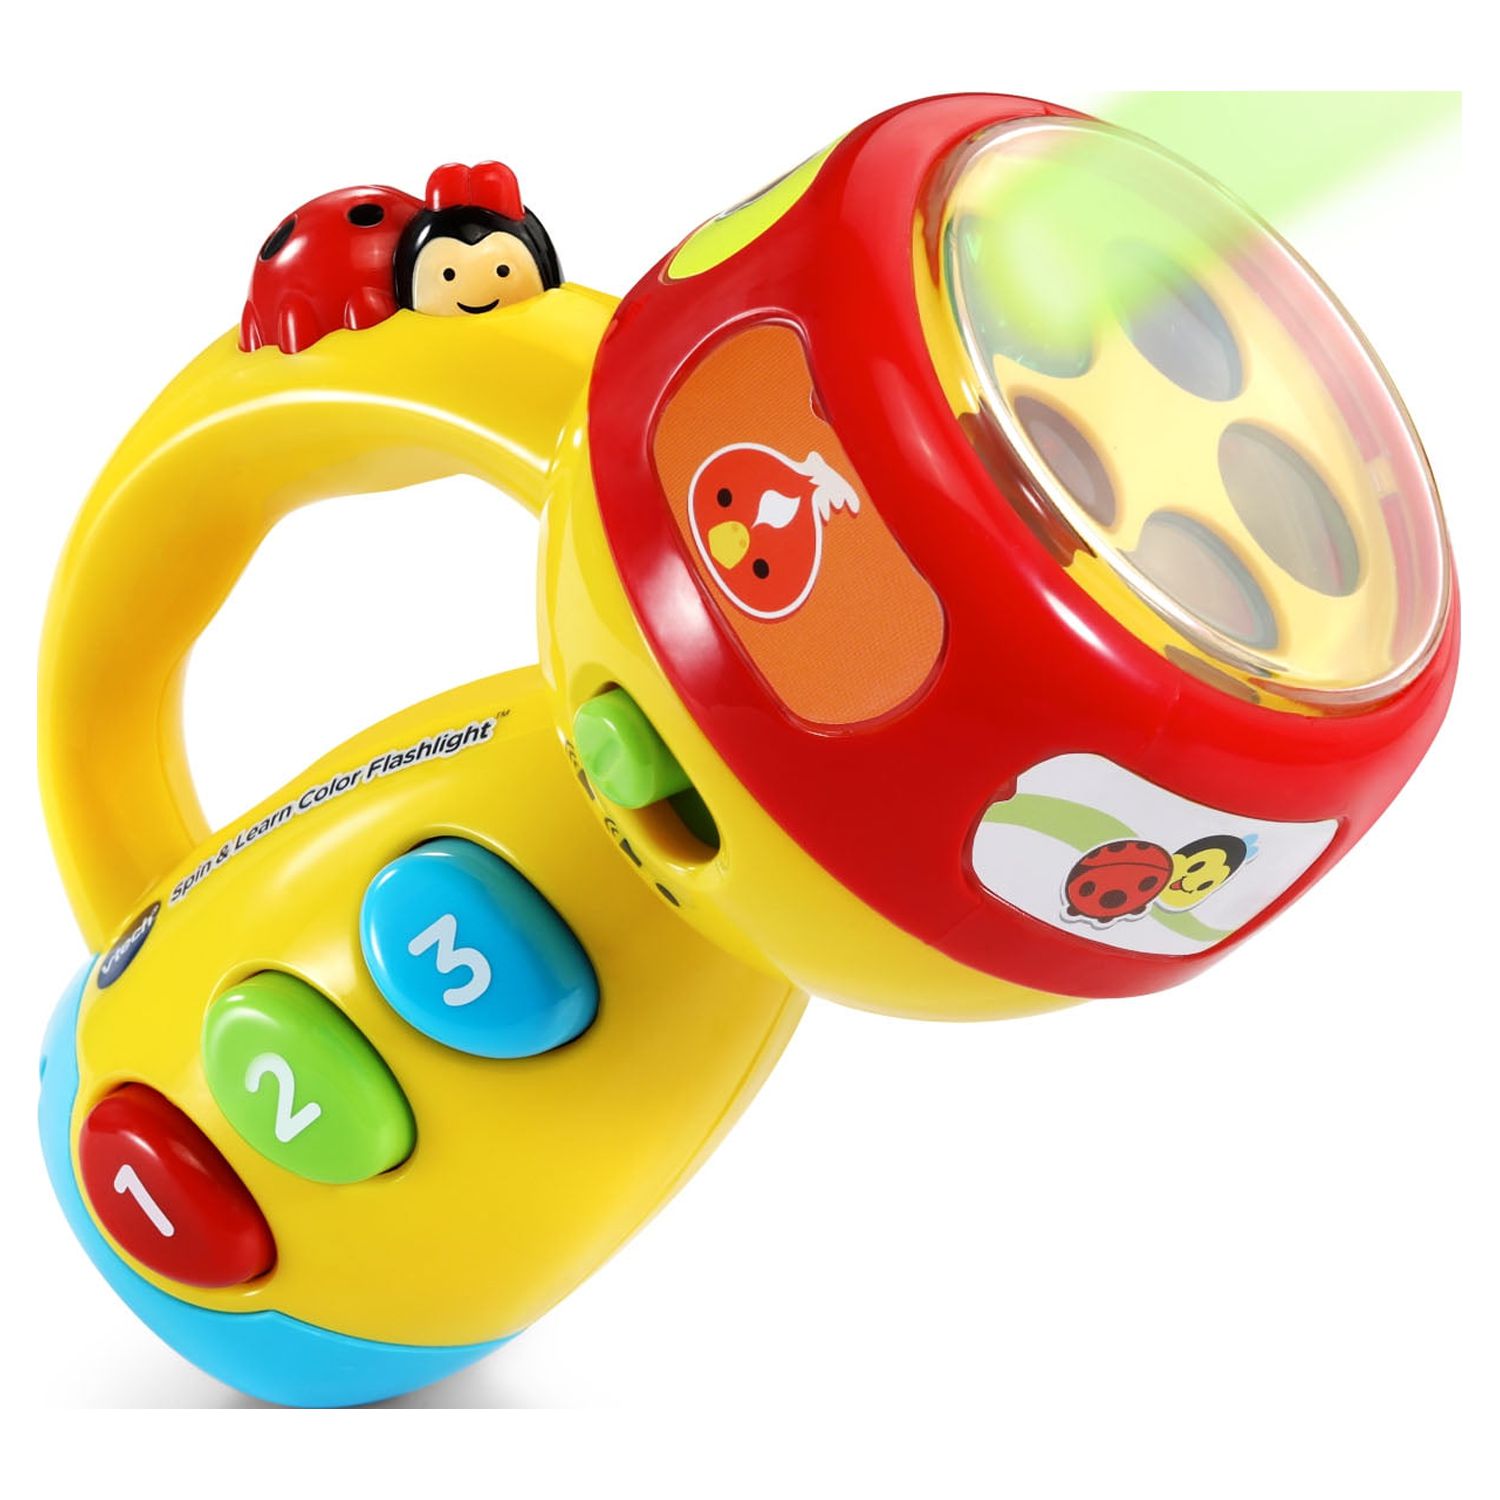 VTech, Spin and Learn Color Flashlight, Toddler Learning Toy - image 1 of 8